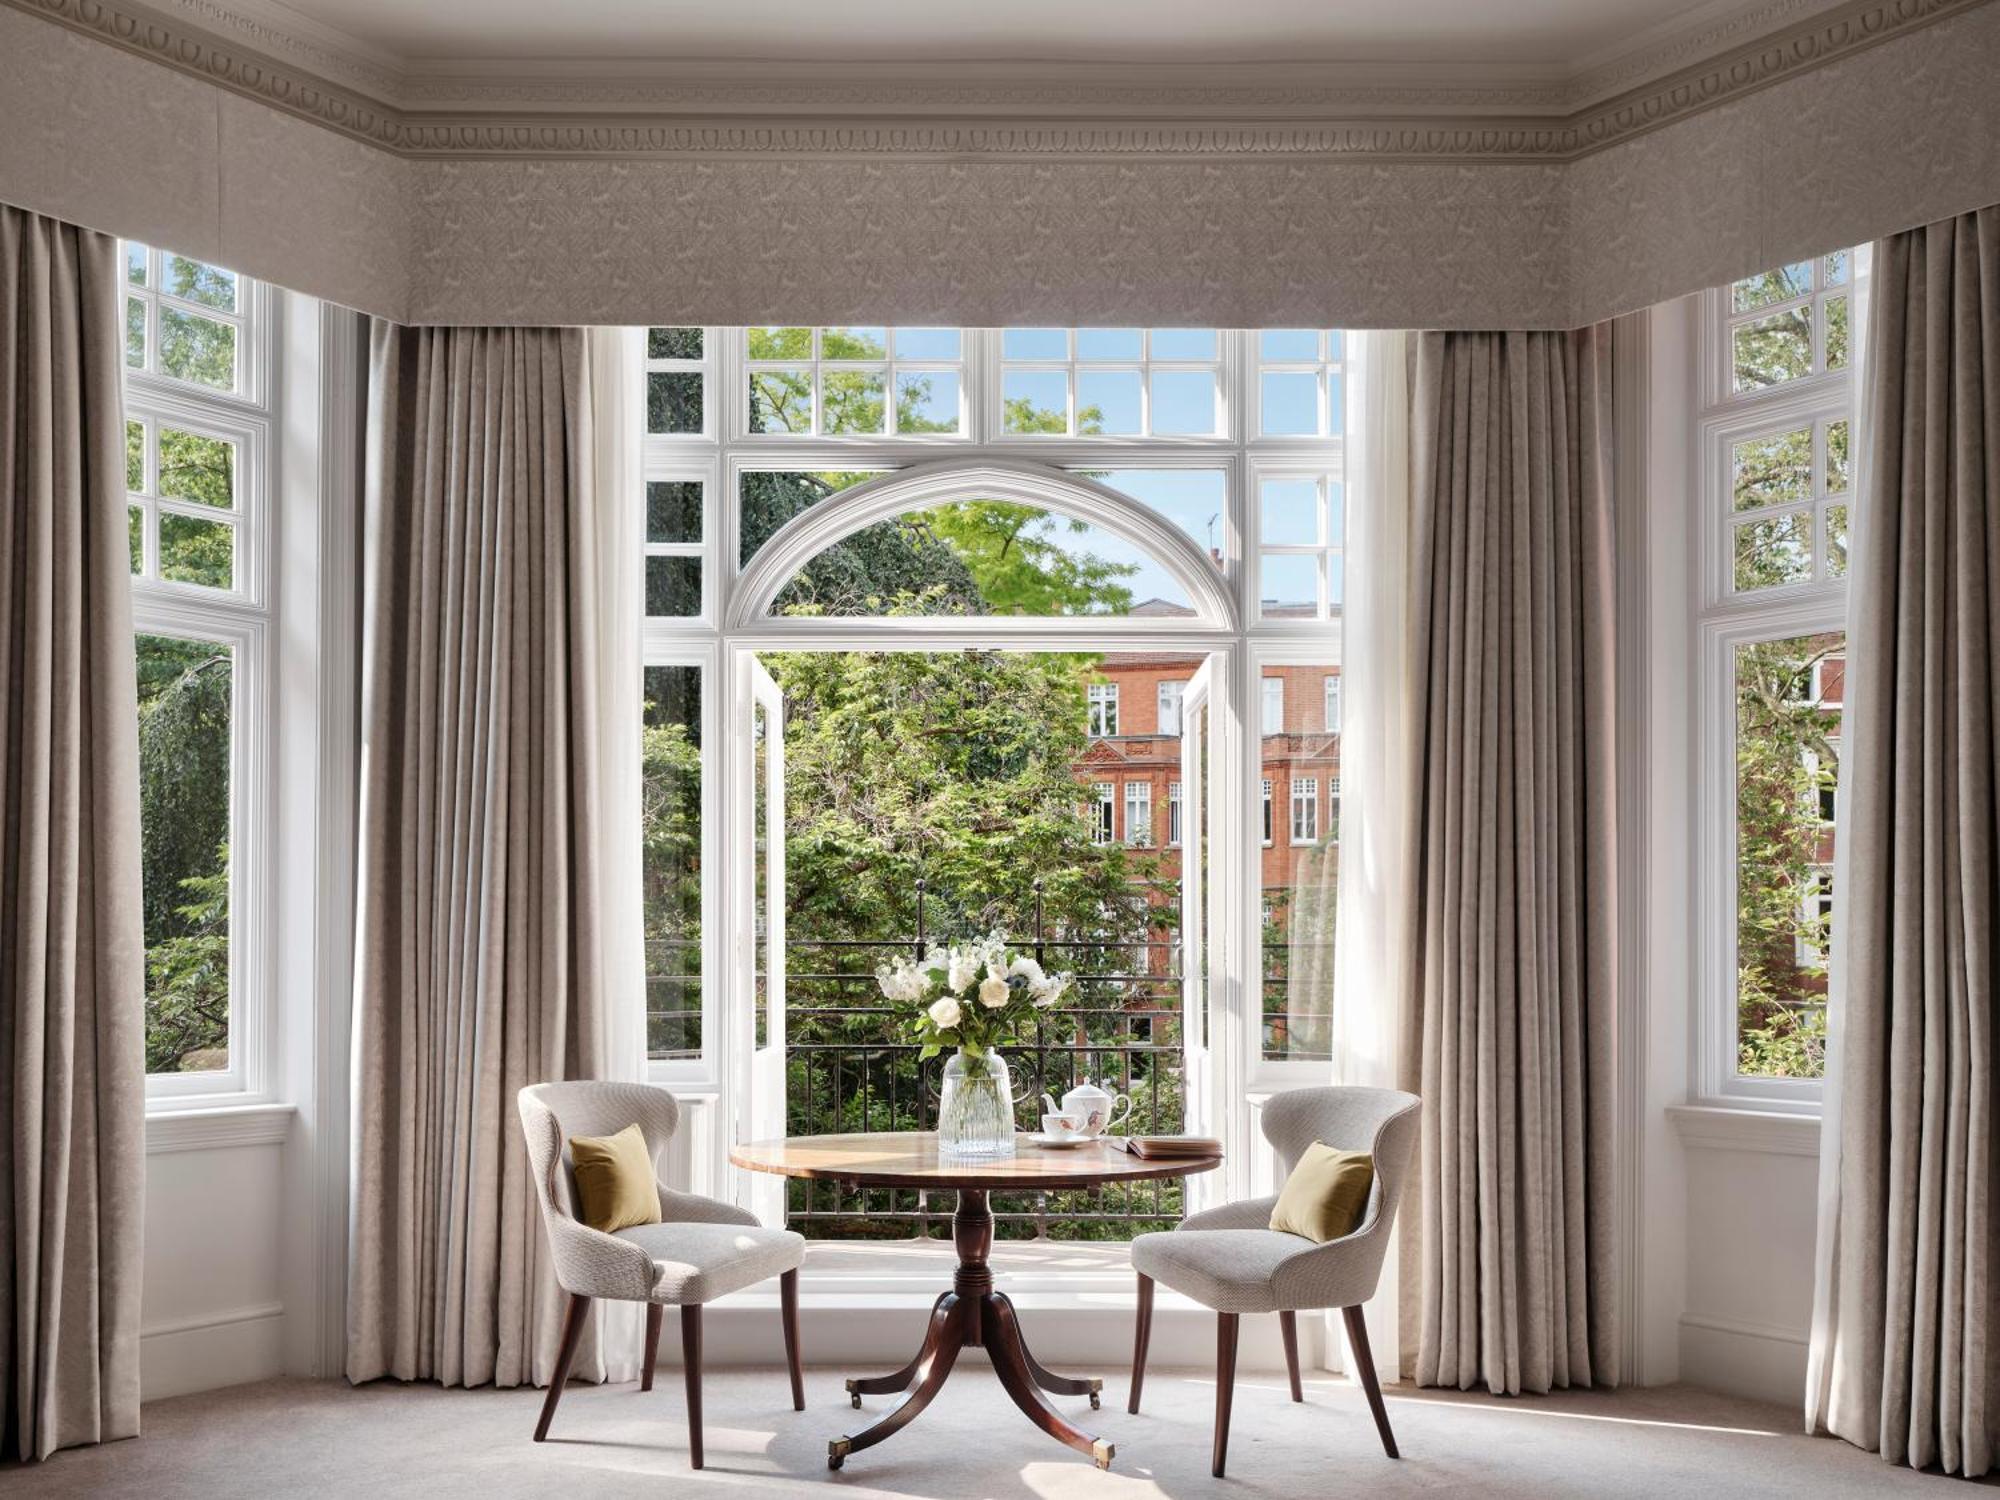 11 Cadogan Gardens, The Apartments And The Chelsea Townhouse By Iconic Luxury Hotels Λονδίνο Εξωτερικό φωτογραφία